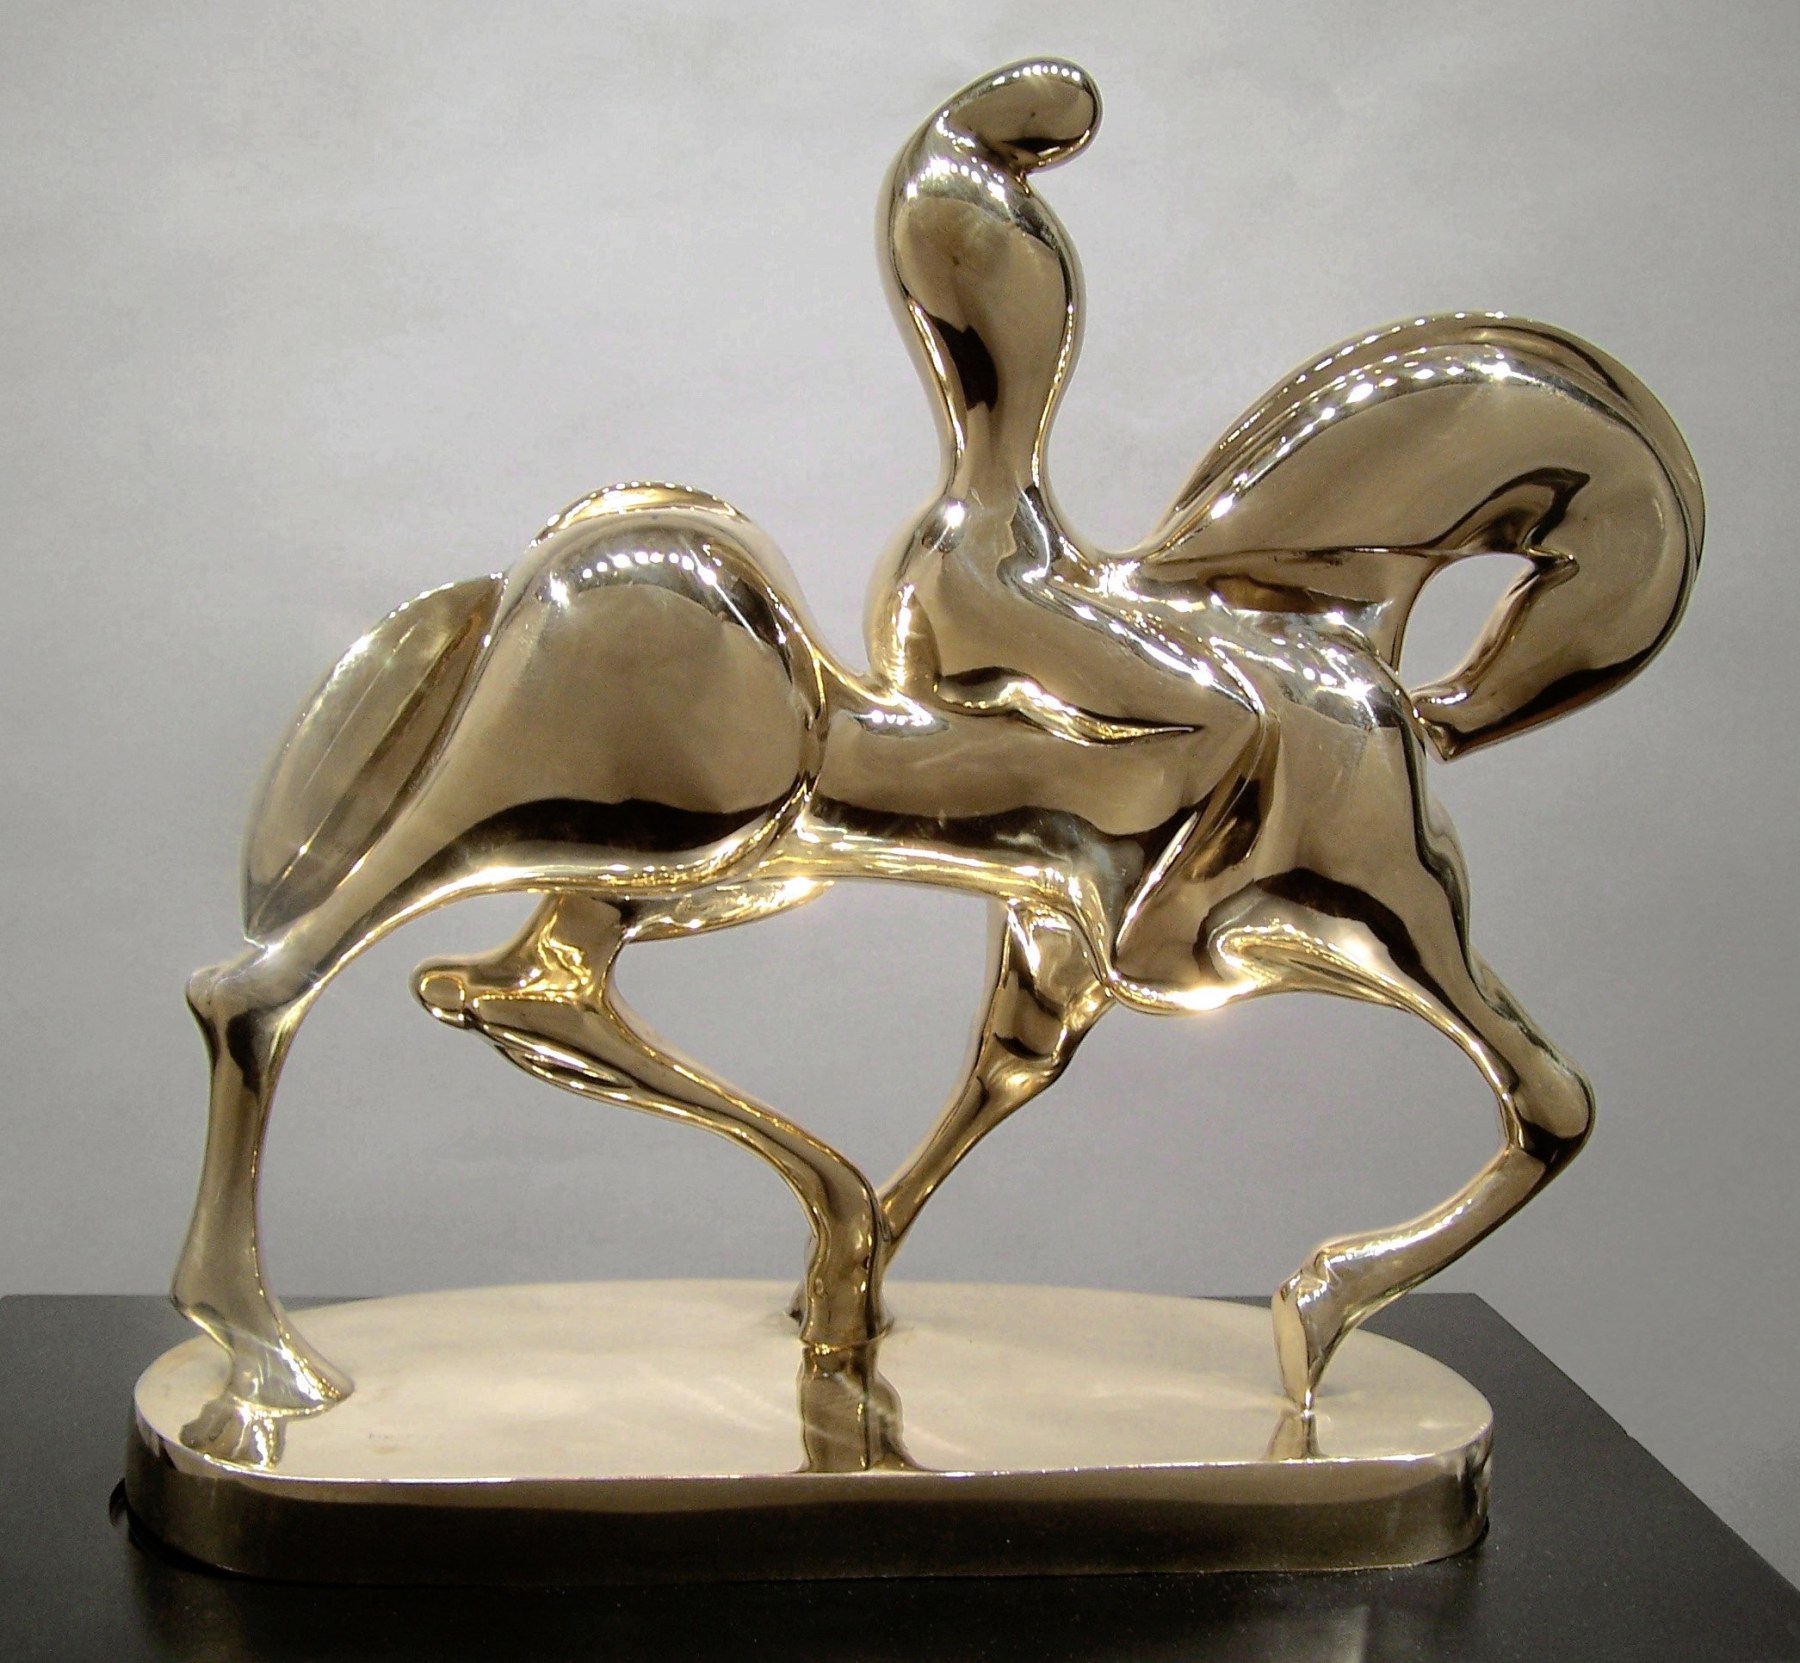 Hugo Robus, The General (SOLD), 1922, polished bronze, 19 x 19 1/2 x 7 3/8 inches, Edition 4/6